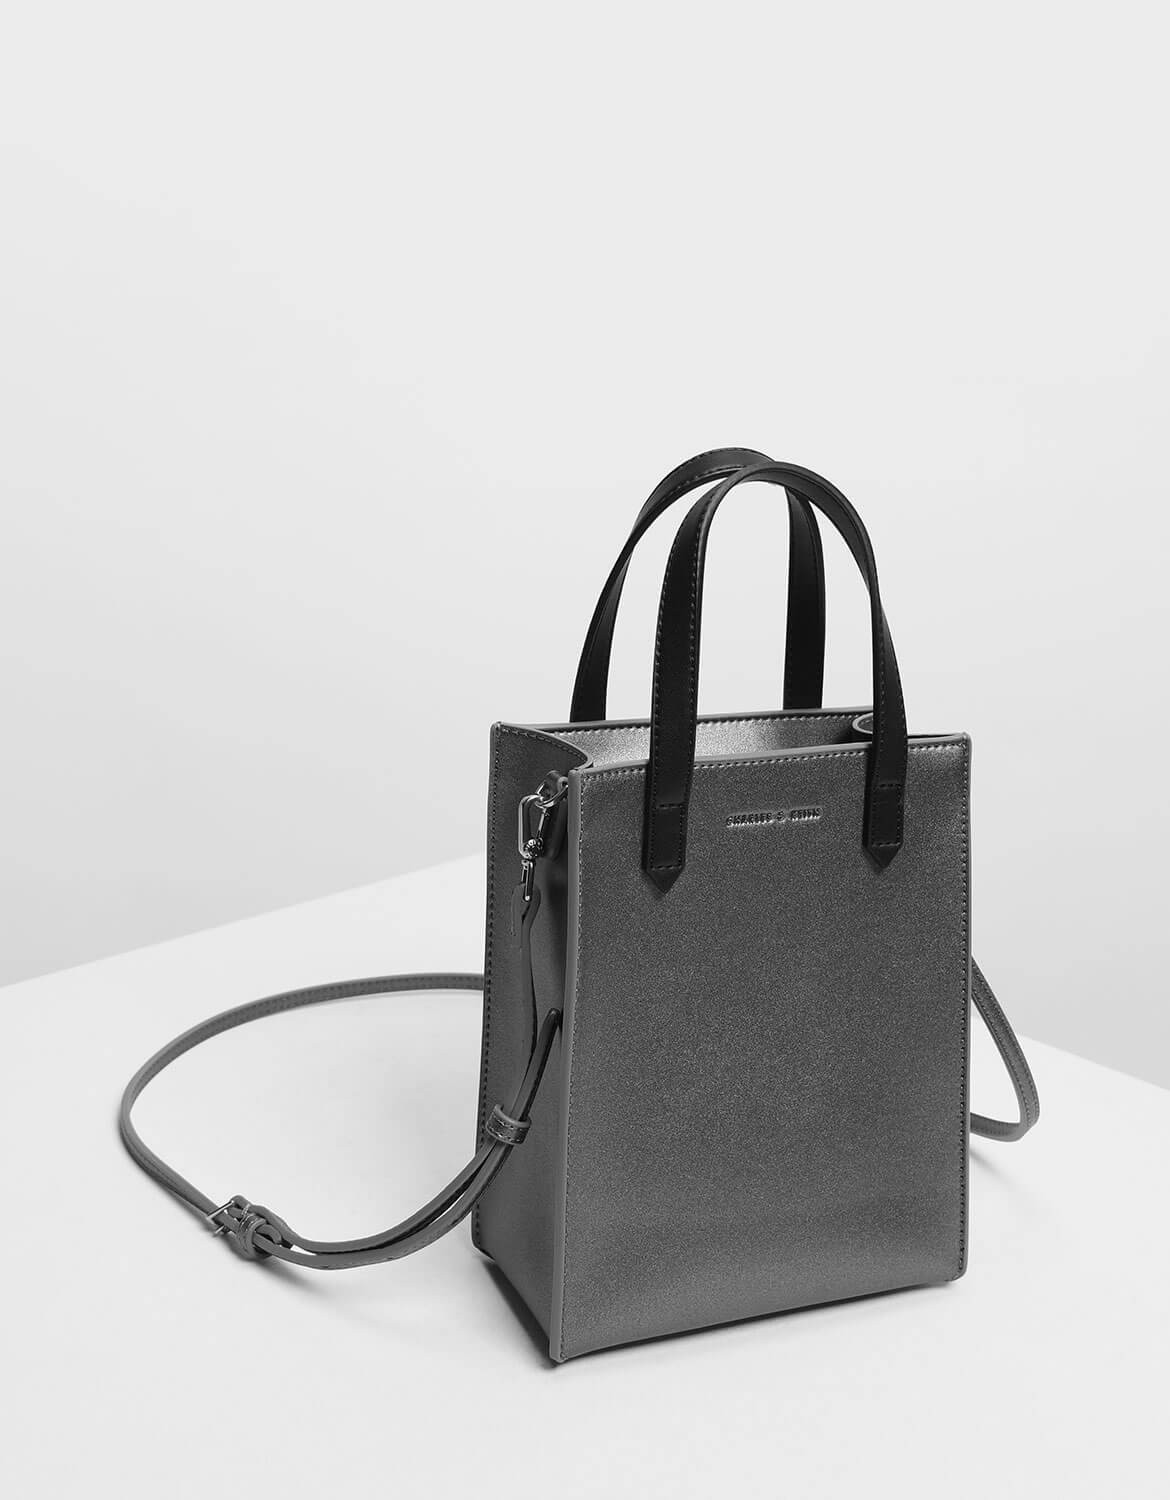 CHARLES & KEITH Zipper Compartment Tote Bag